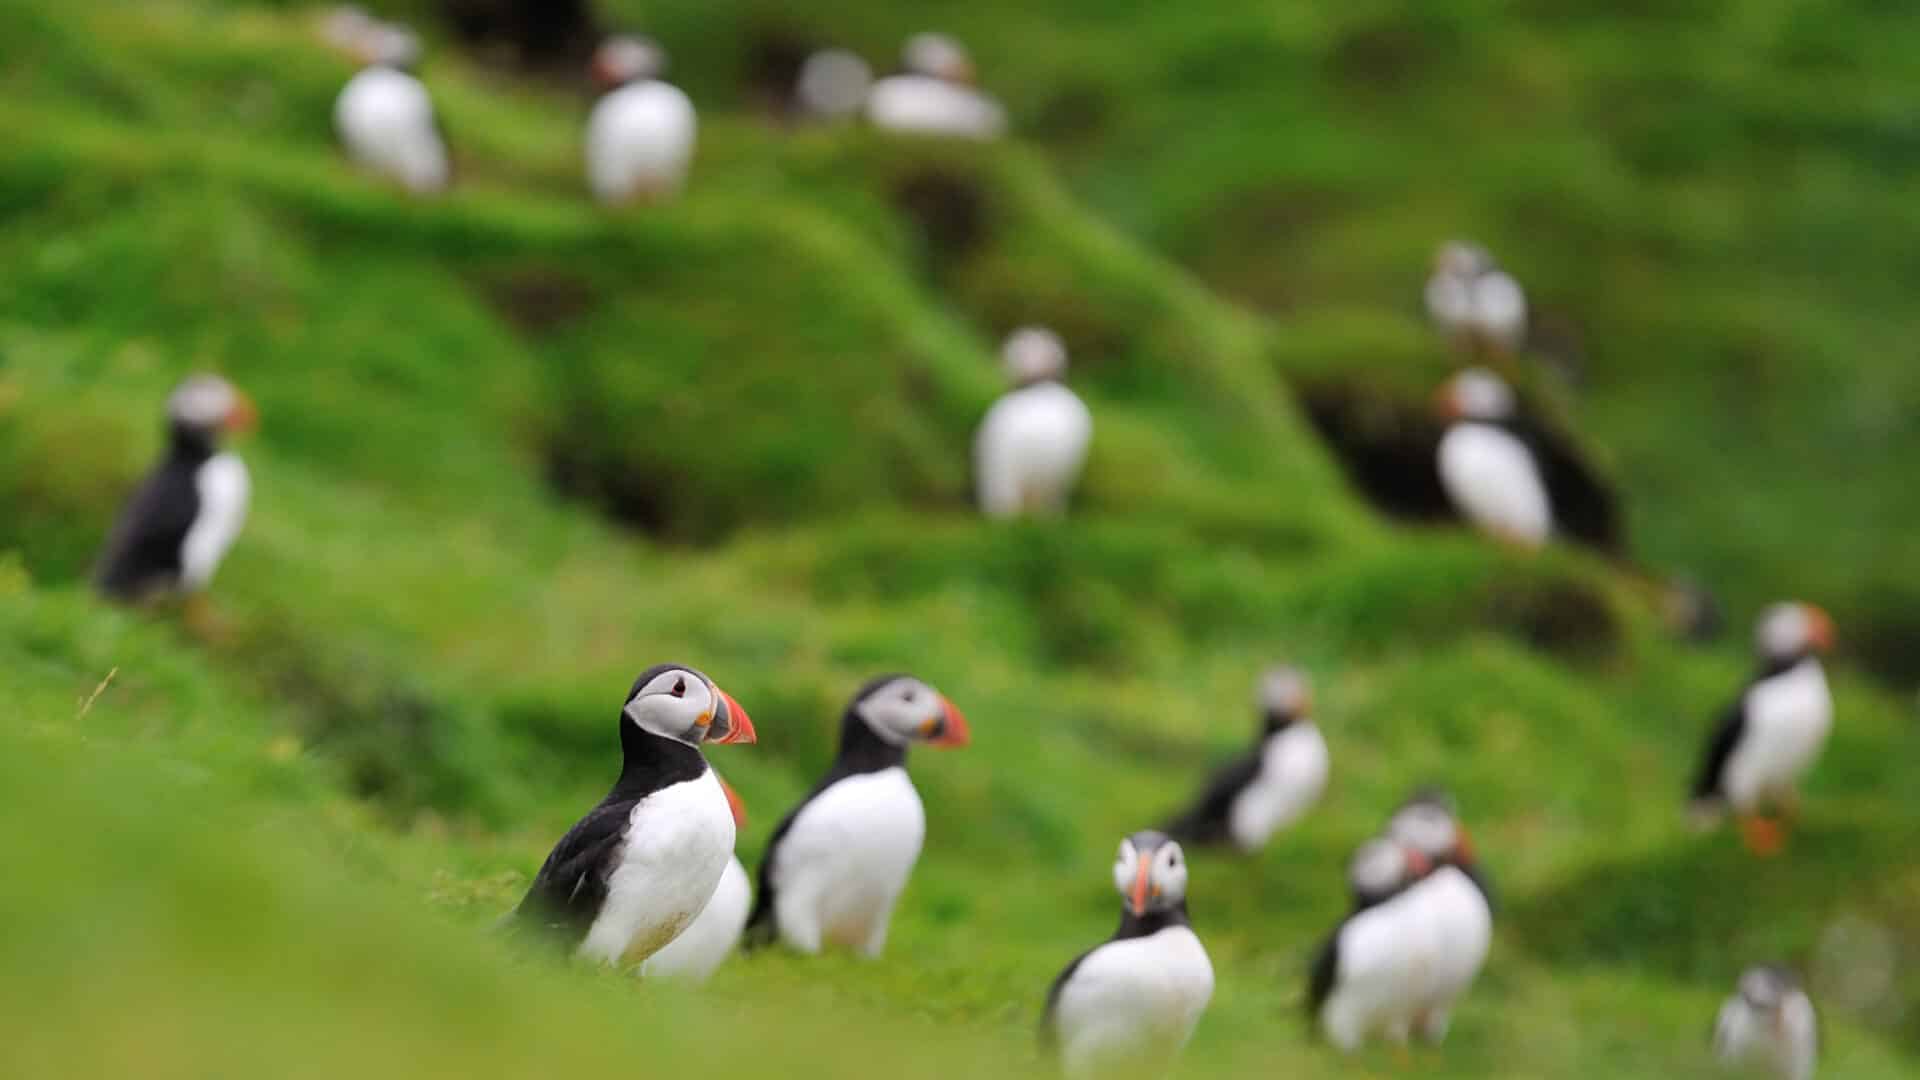 Puffins in Iceland.